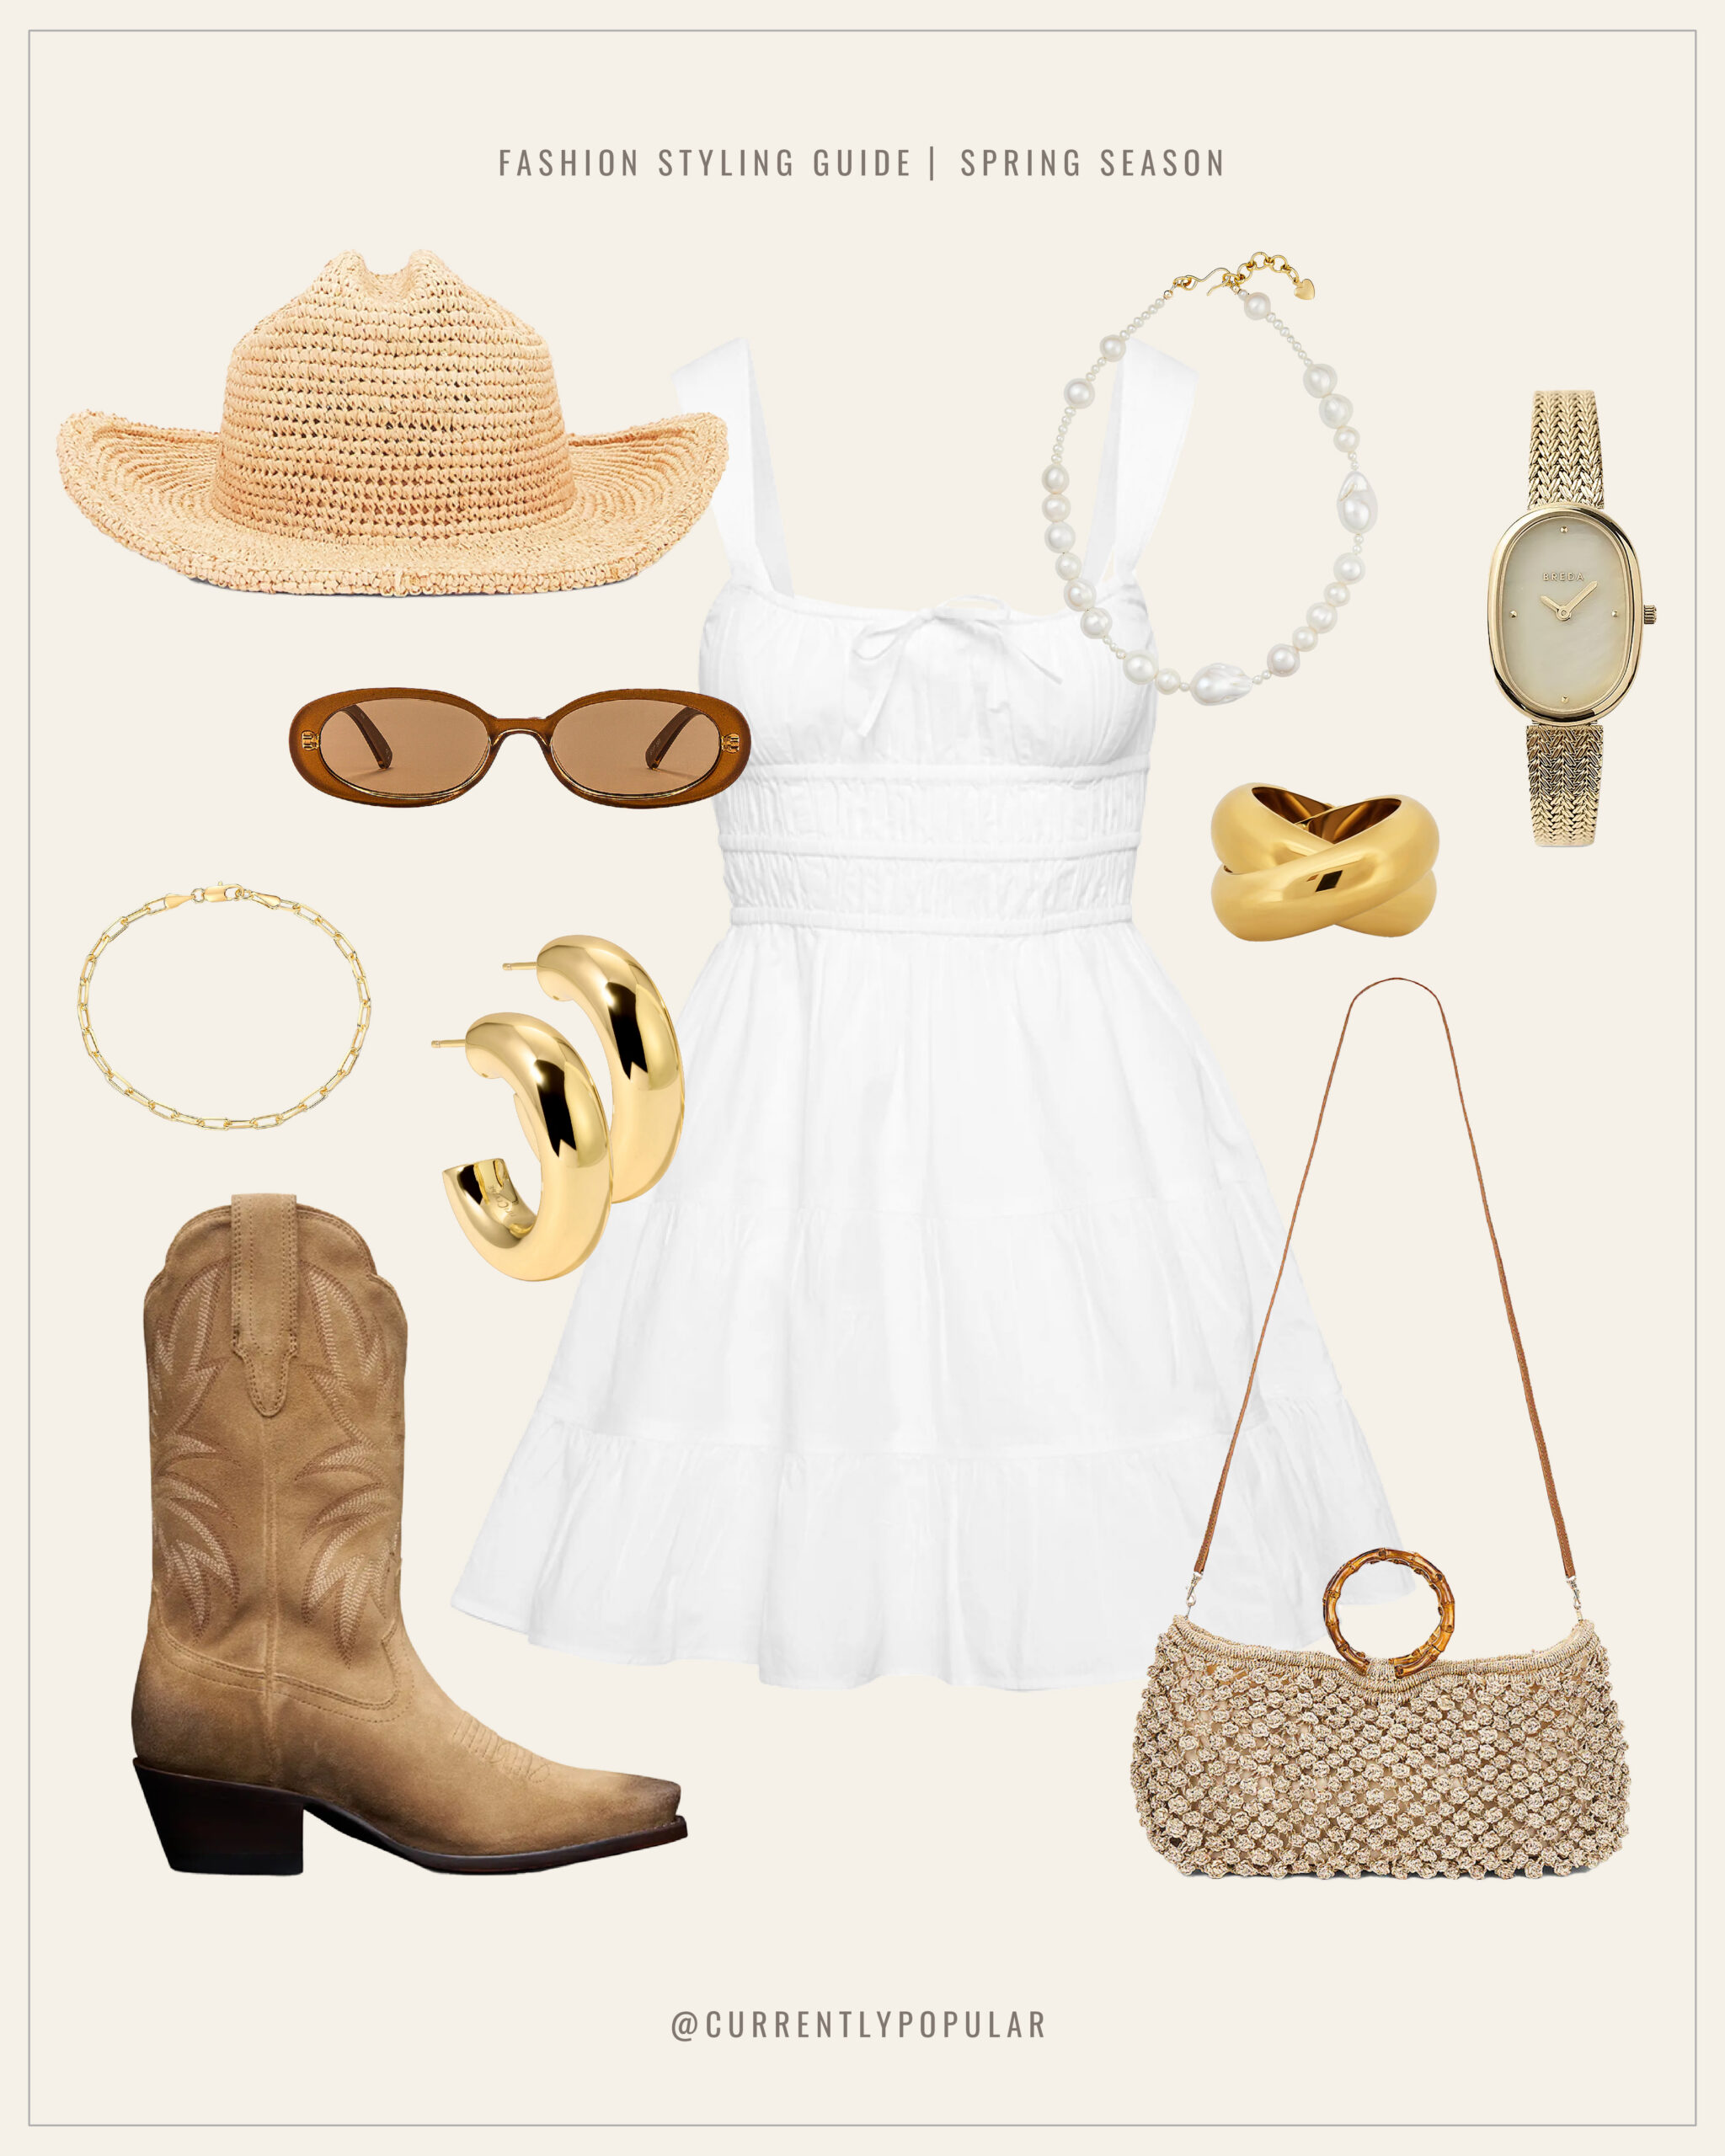 This is an image of a cowgirl next door inspired outfit. It features a white mini dress, gold jewelry, straw cowgirl hat, straw purse and suede brown cowgirl boots